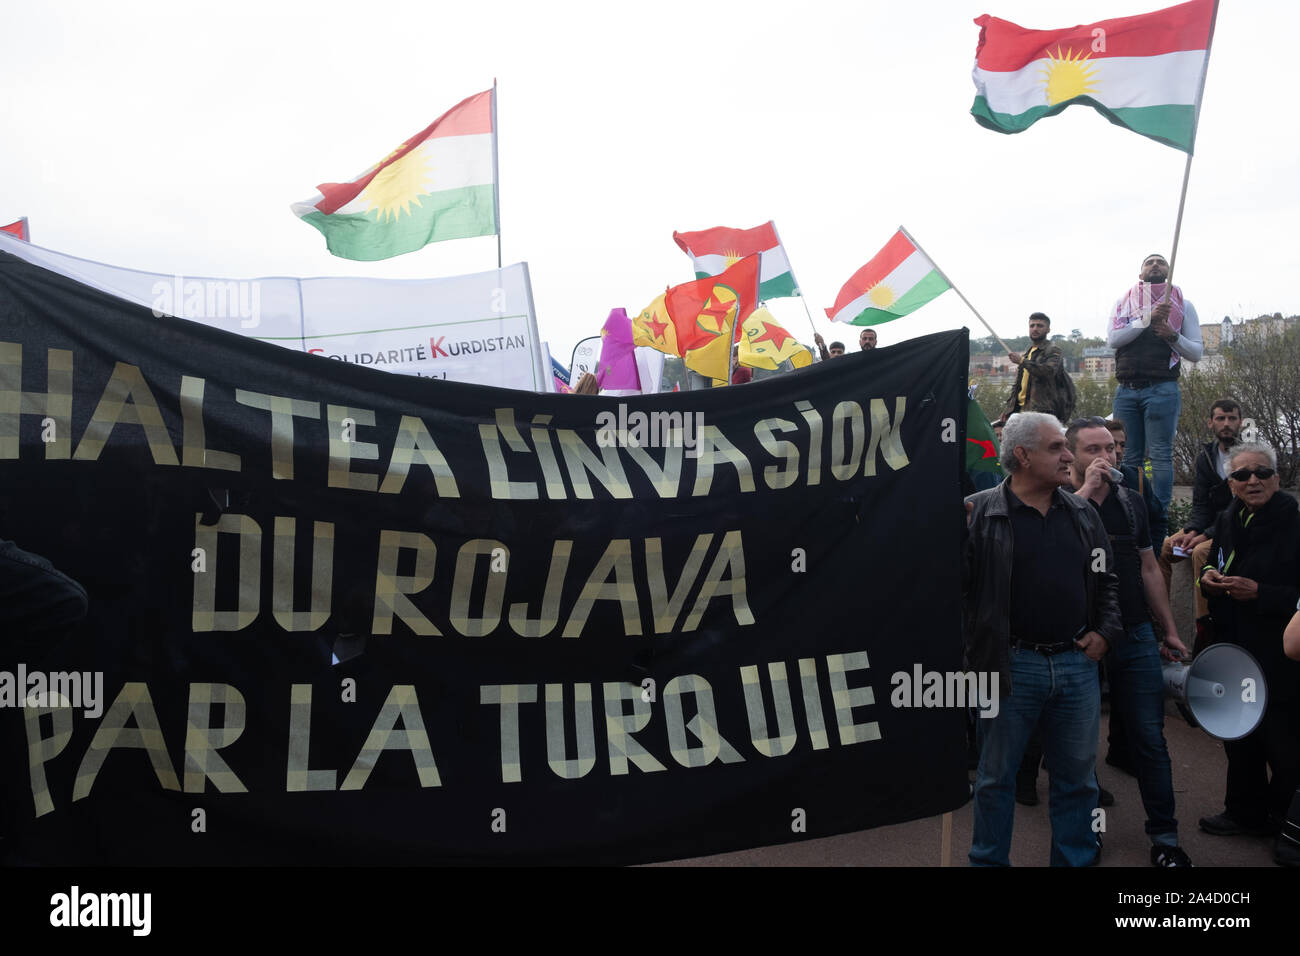 On 12 October 2019, Lyon, Auvergne-Rhône-Alpes, France. Demonstration against Turkish strikes in Syria. Kurdish demonstrators with flags on the Bellec Stock Photo